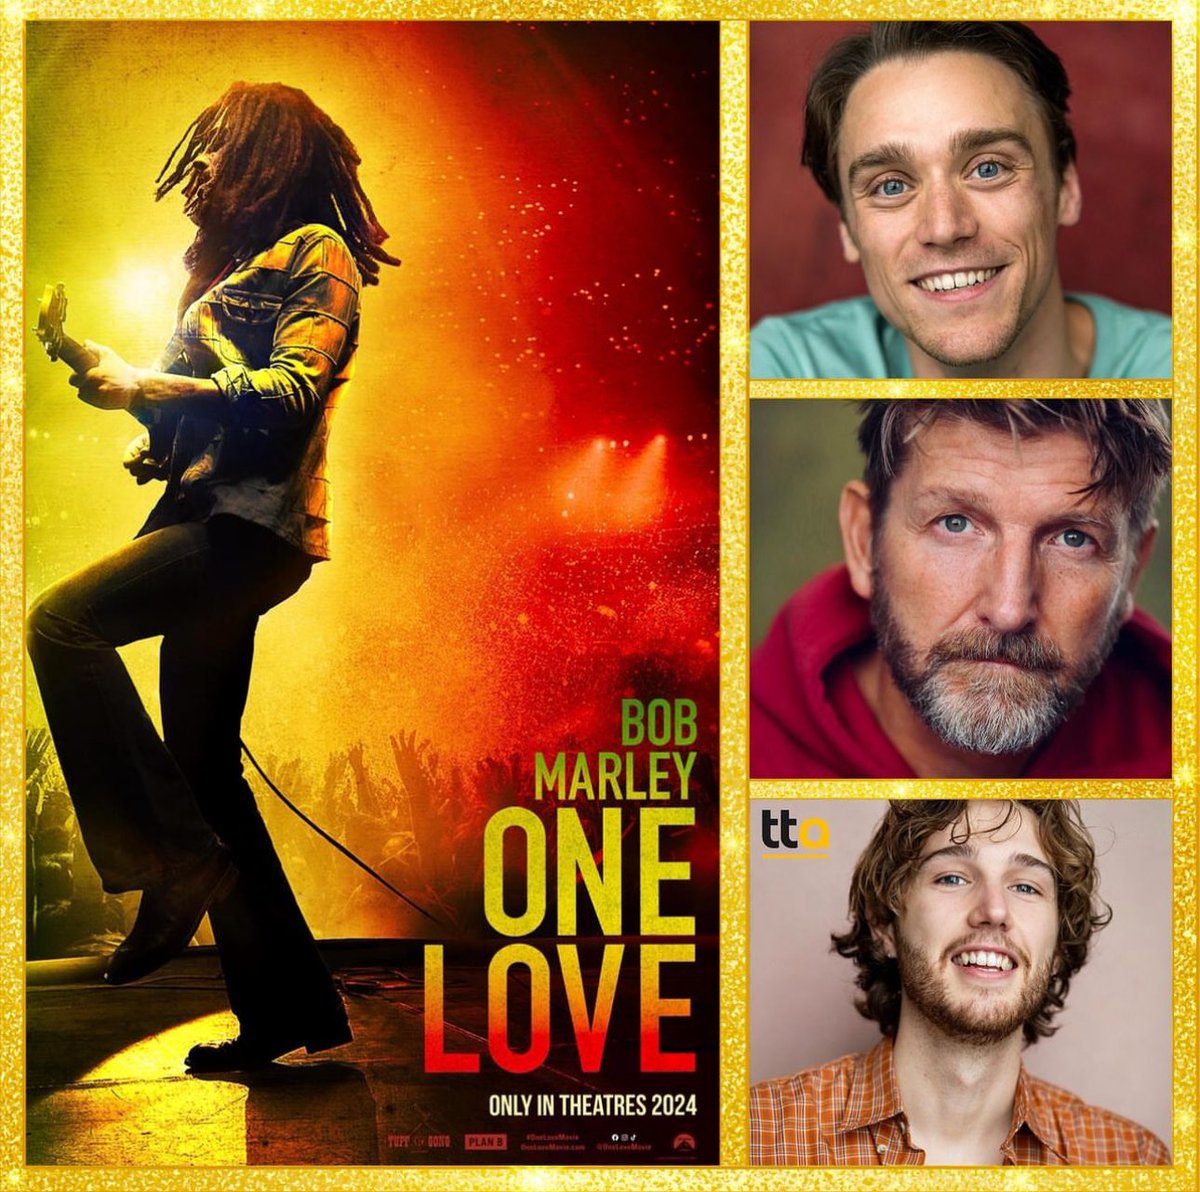 Our incredible BENEDICT CLARKE, SIMON BASS & DOMINIC CHARMAN can be seen in the new movie, Bob Marley: One Love! Out now!✨ ⭐️Clients: BENEDICT CLARKE, SIMON BASS & DOMINIC CHARMAN 🎬Casting: @KharmelCochrane 💥Film: Bob Marley, One Love #tta #ttaadults #bobmarleyonelove